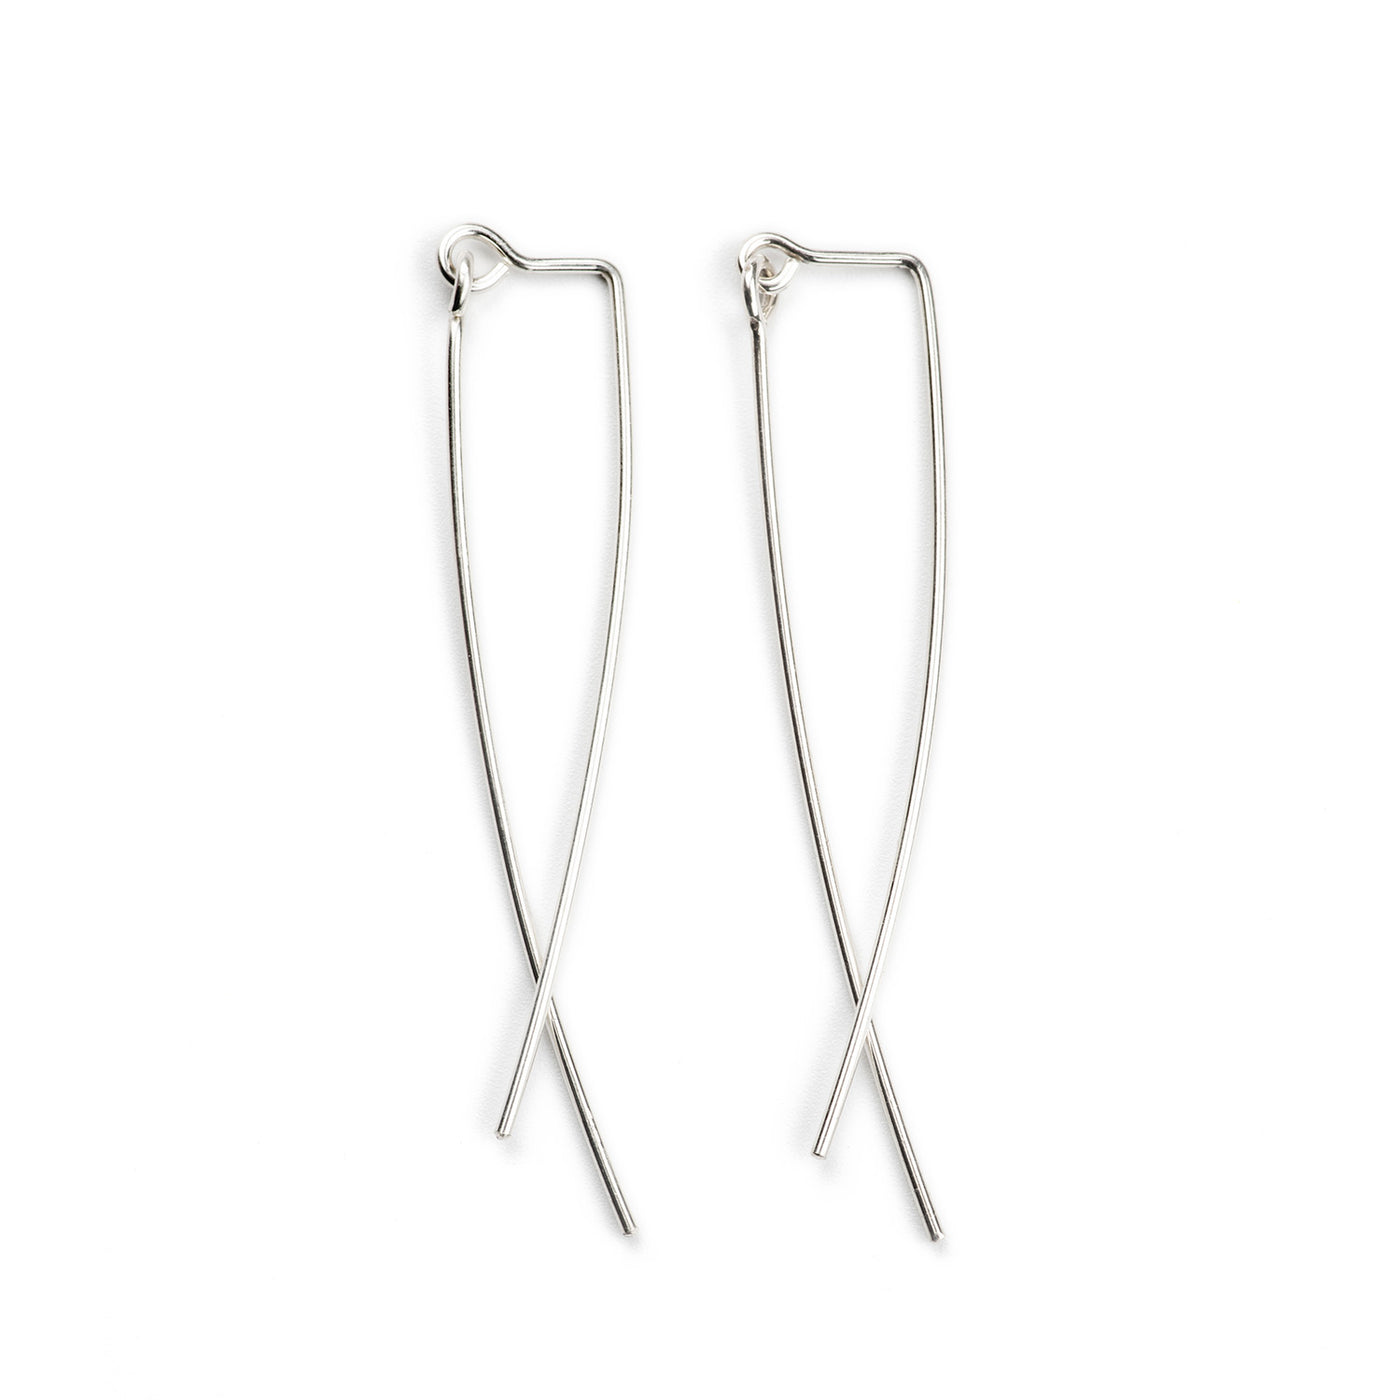 A close up image of the Curved Dangleback earrings